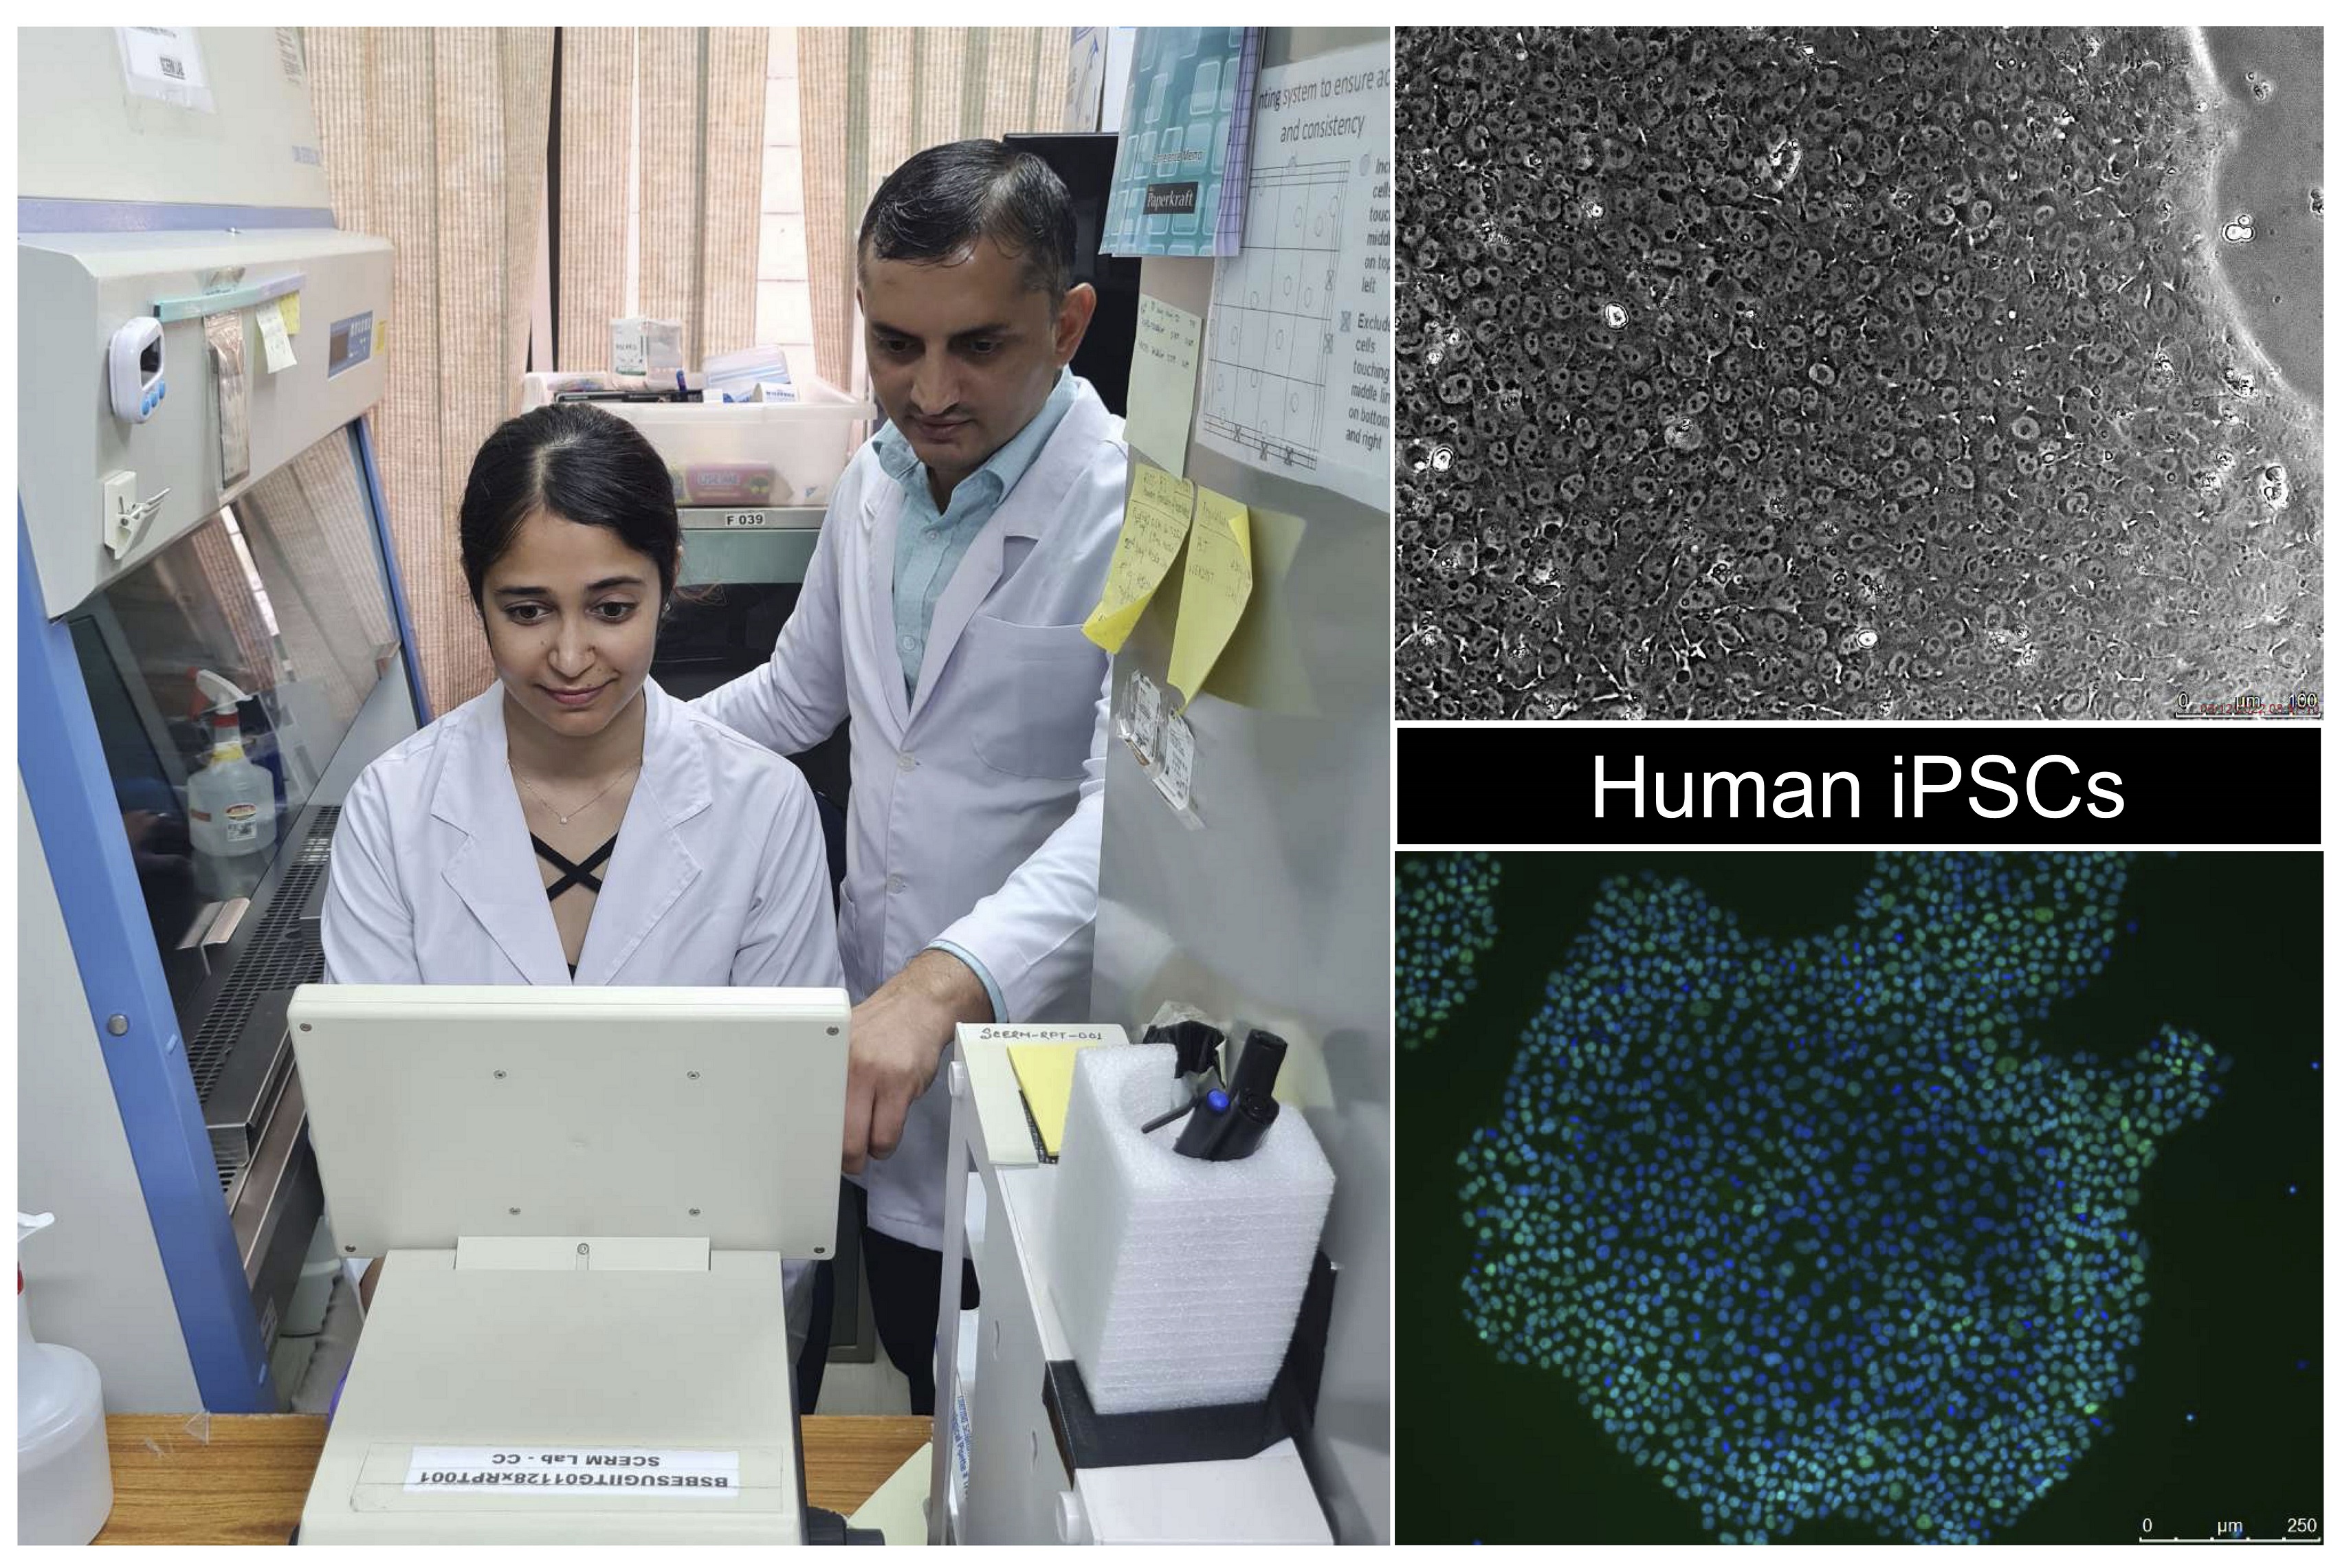 Multi Institutional team led by IIT Guwahati produces Pluripotent Stem Cells from Skin Cells